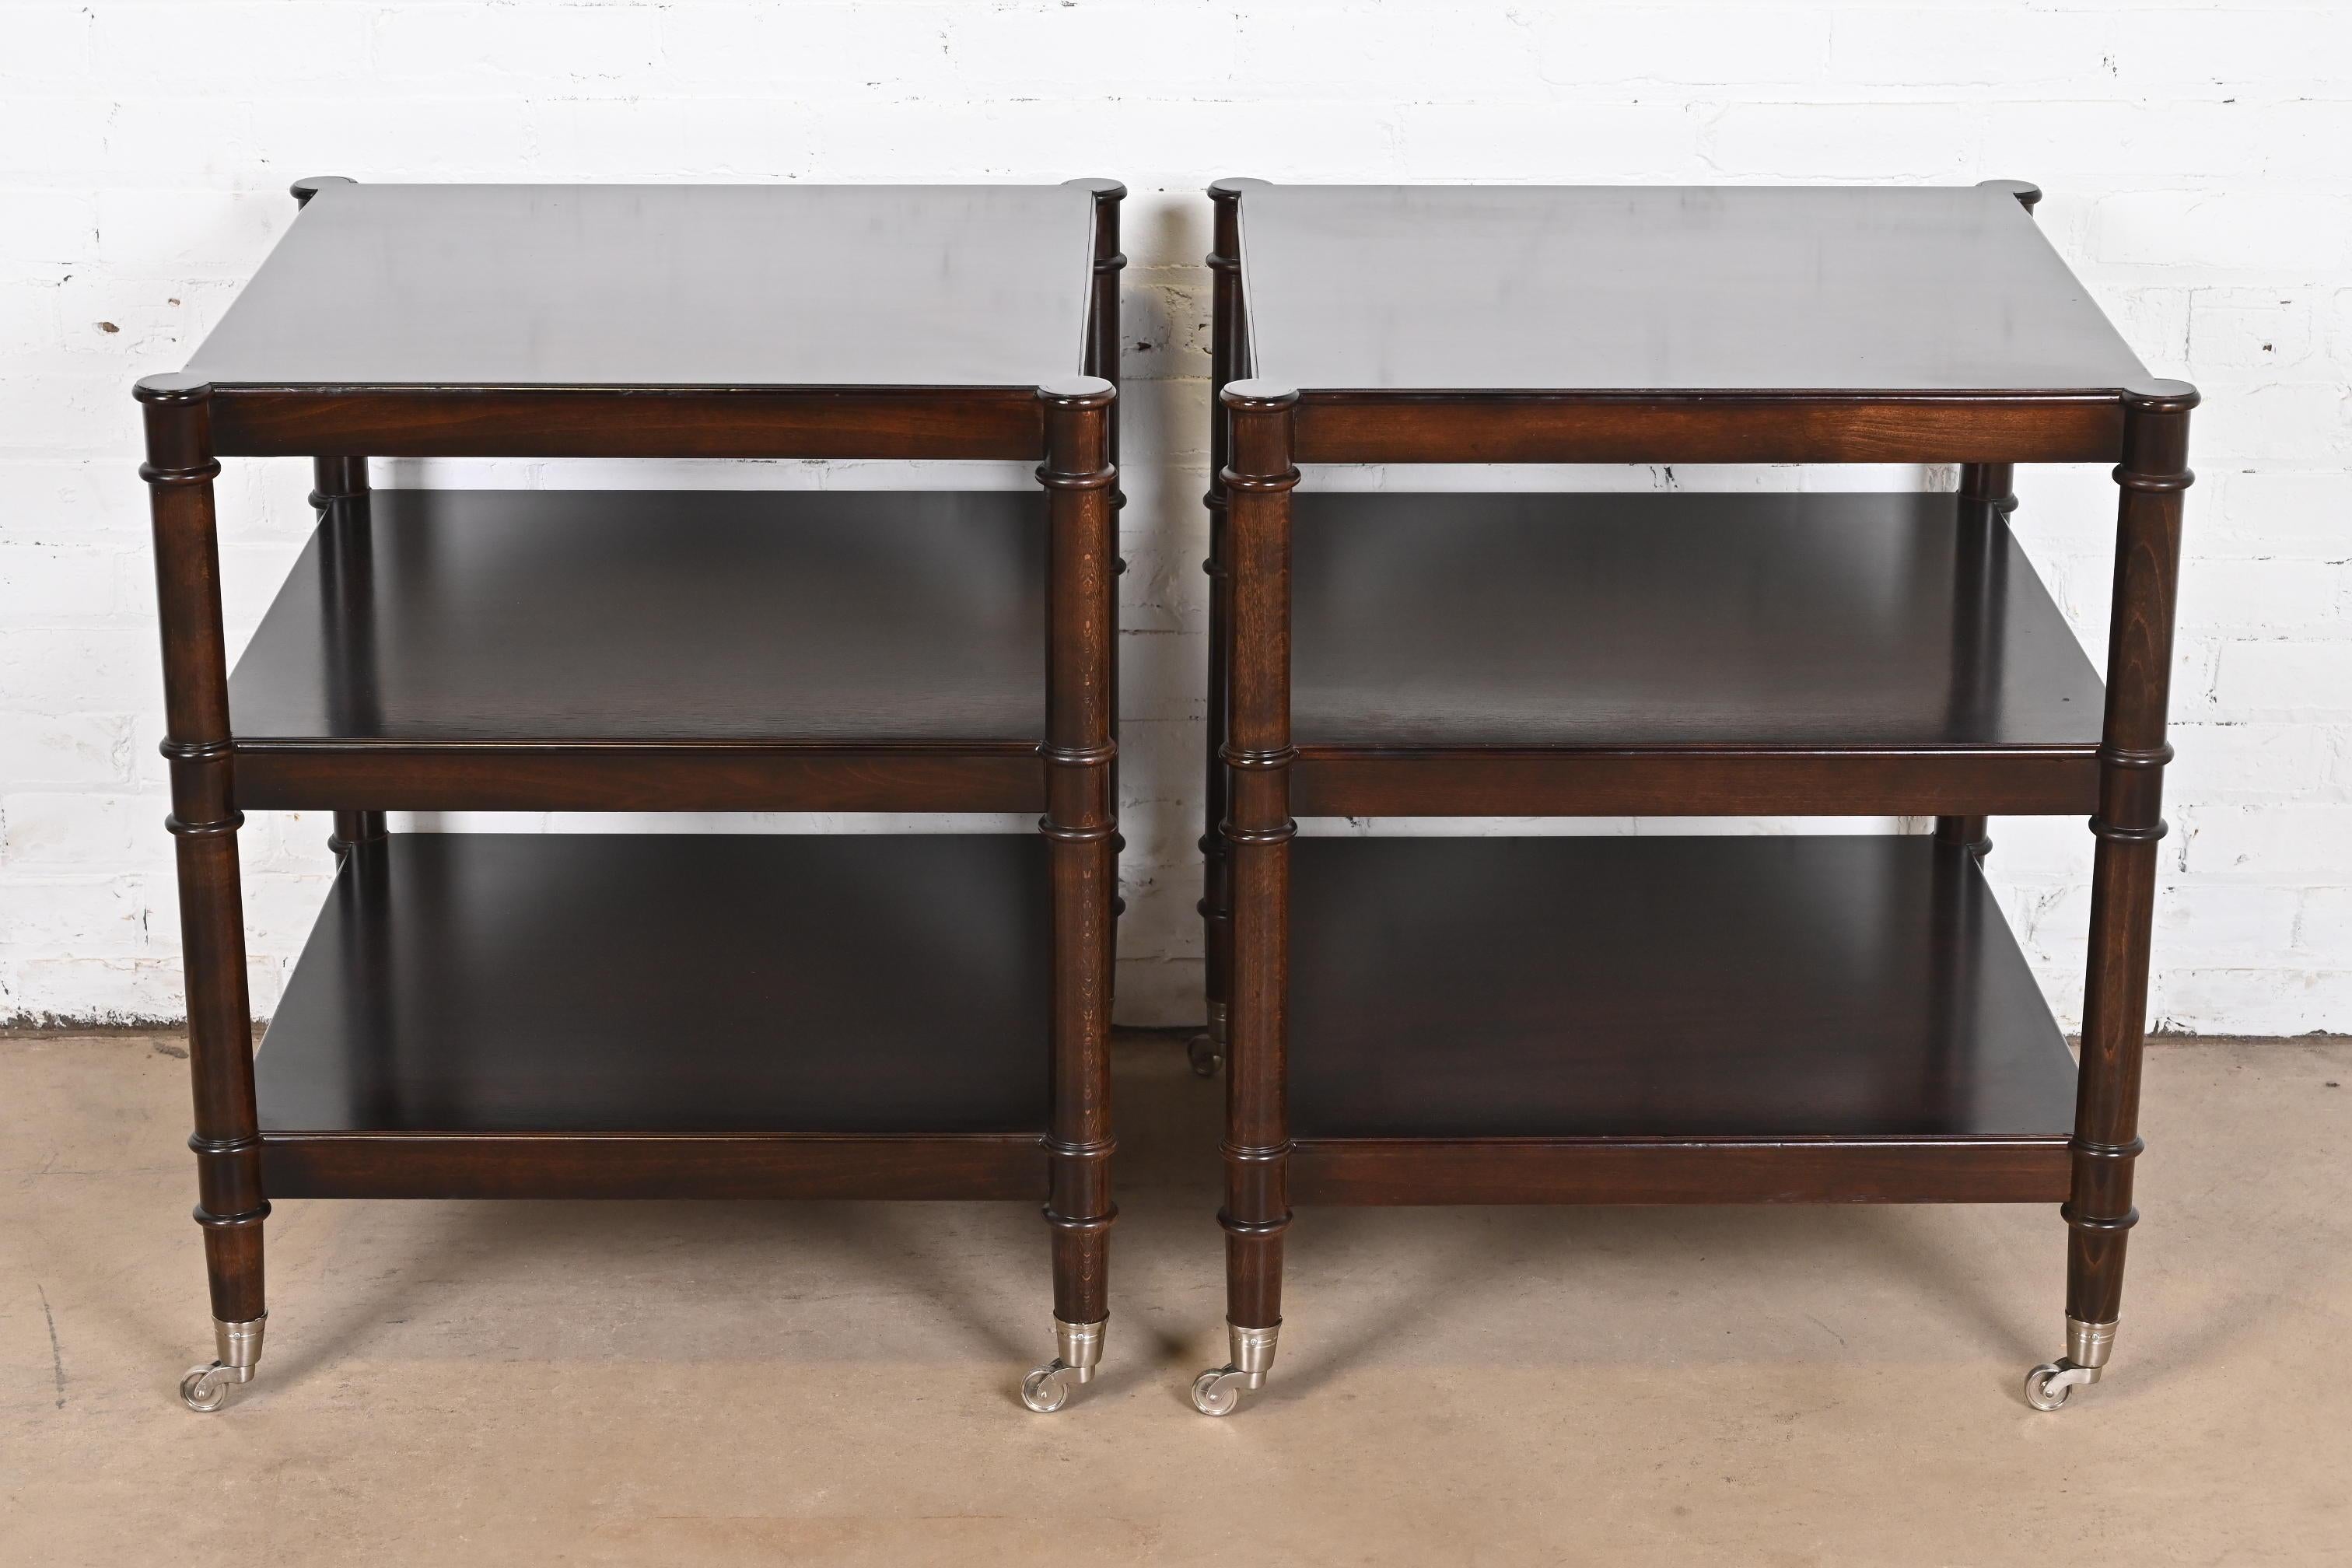 A gorgeous pair of French Regency style nightstands, end tables, or tea tables

By Baker Furniture, 